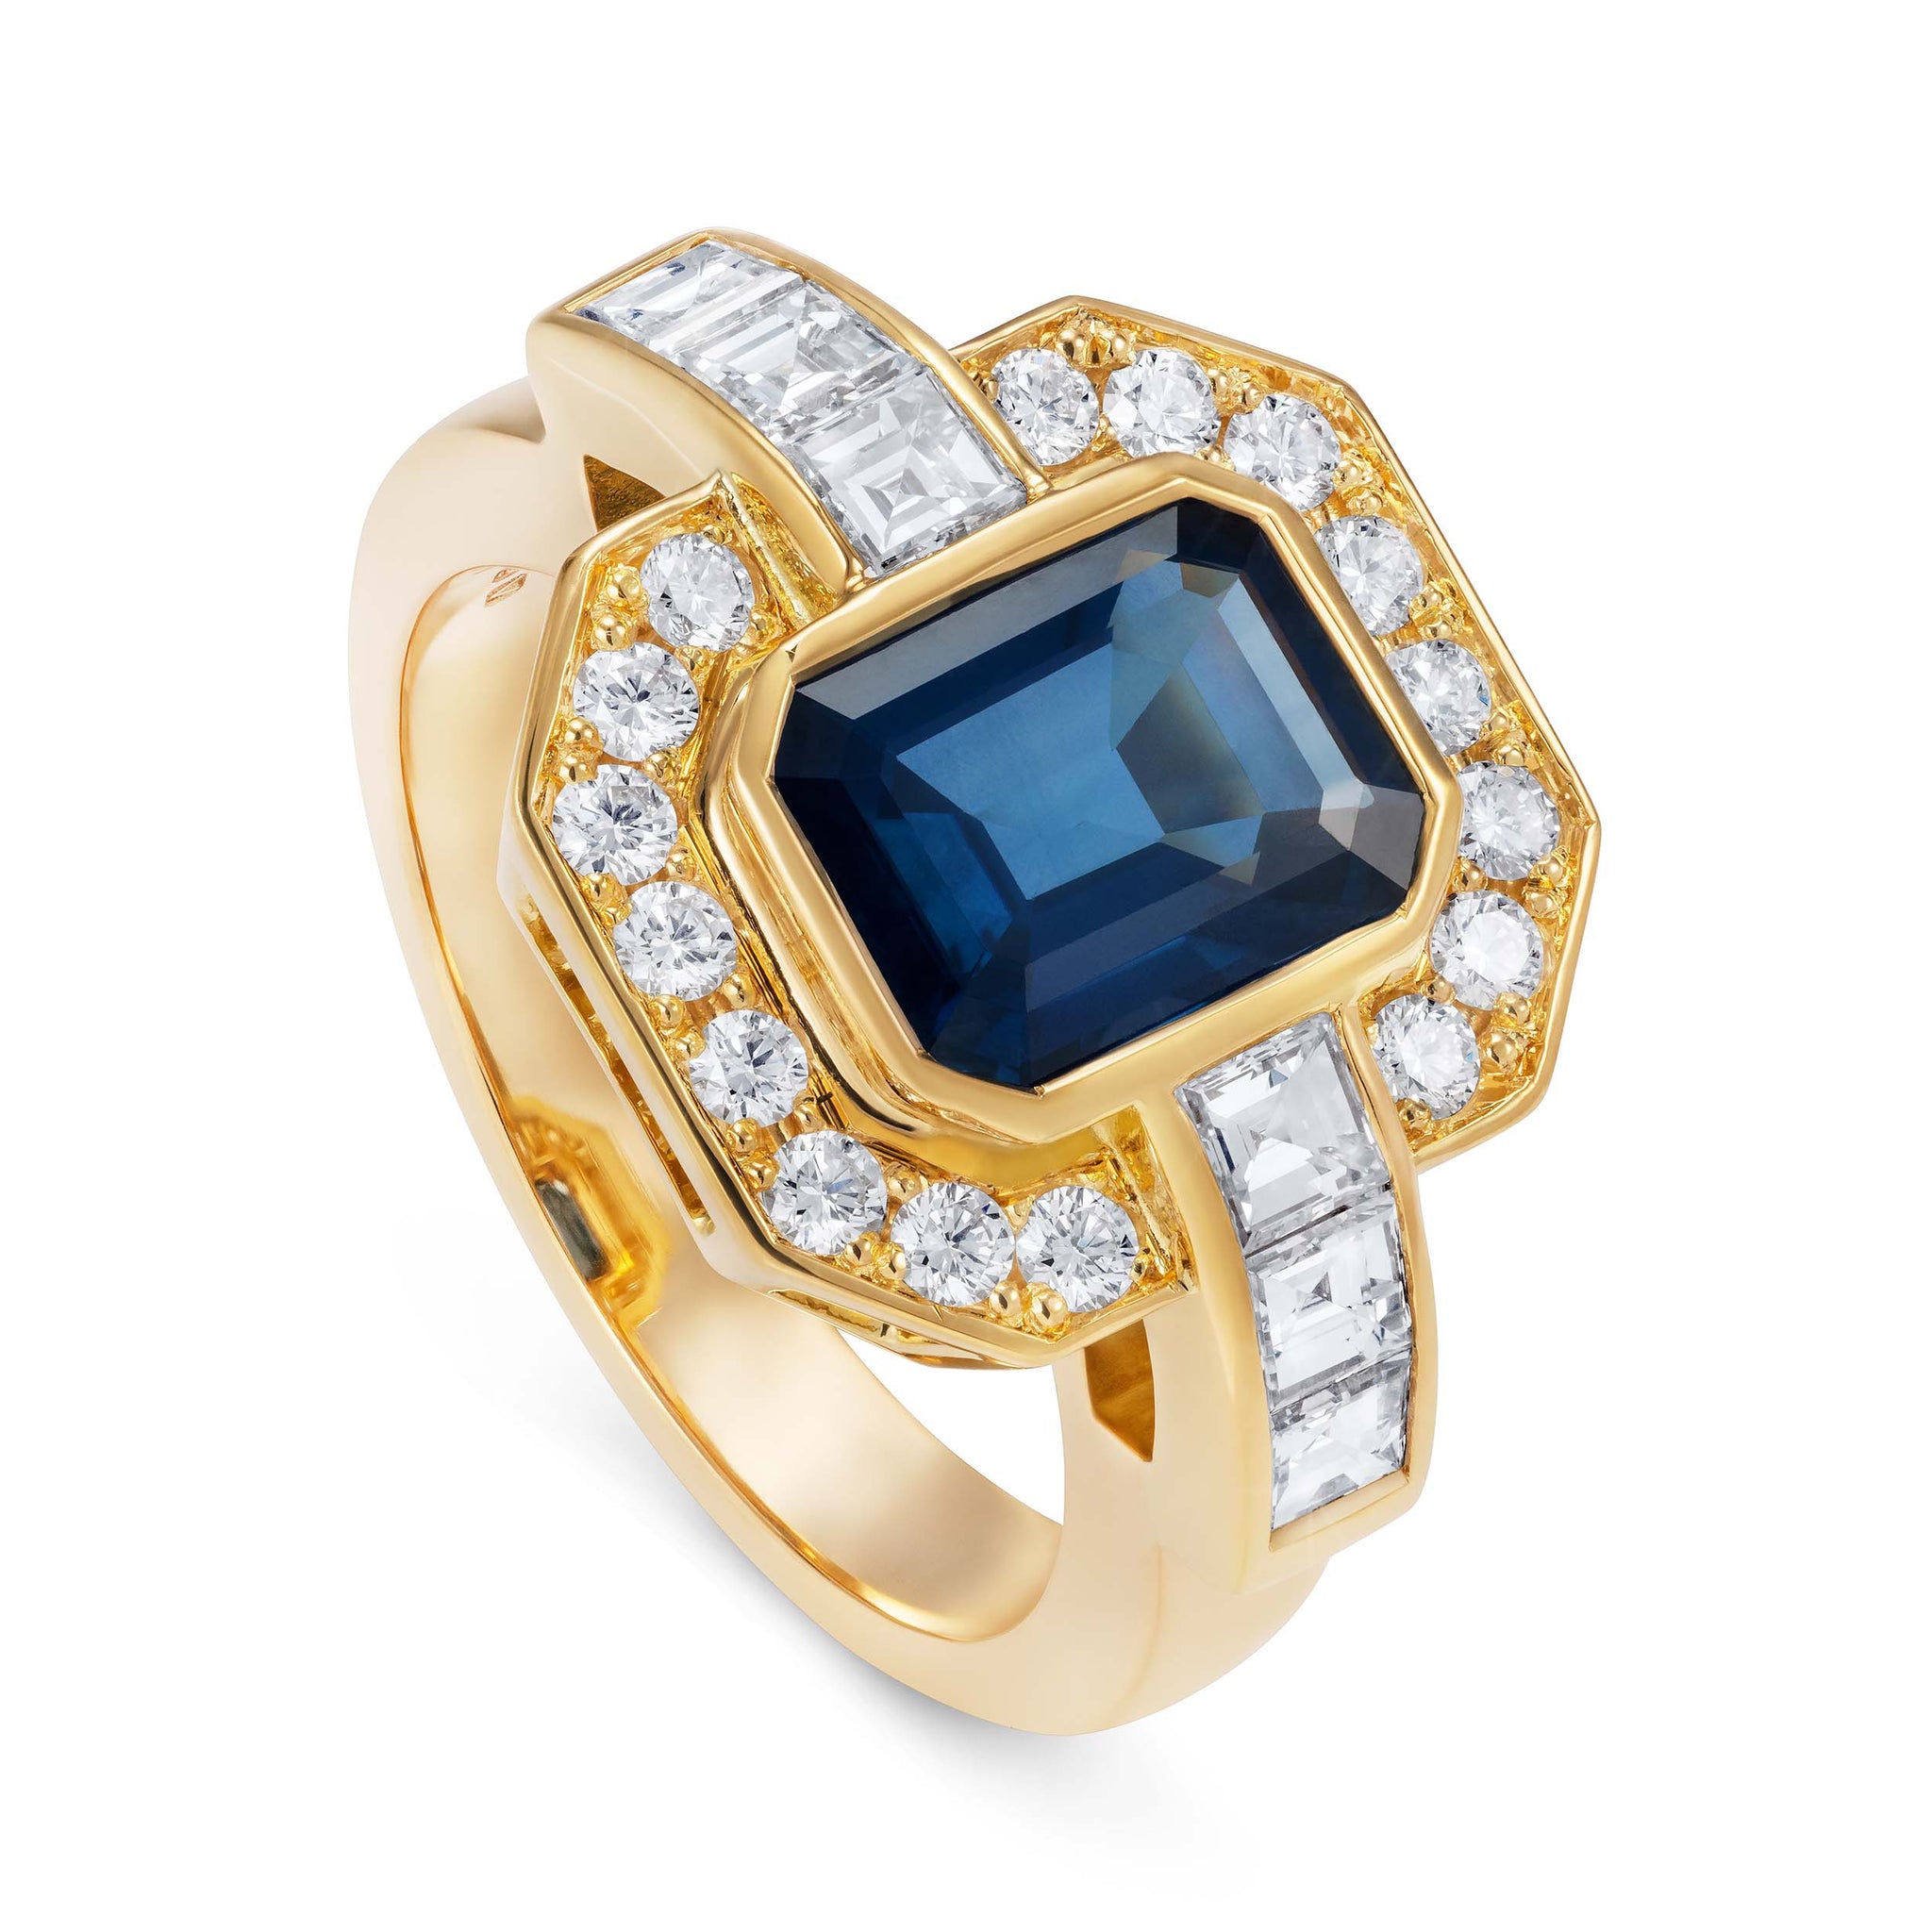 Bold Art Deco Sapphire Engagement Ring by Yasmin Everley